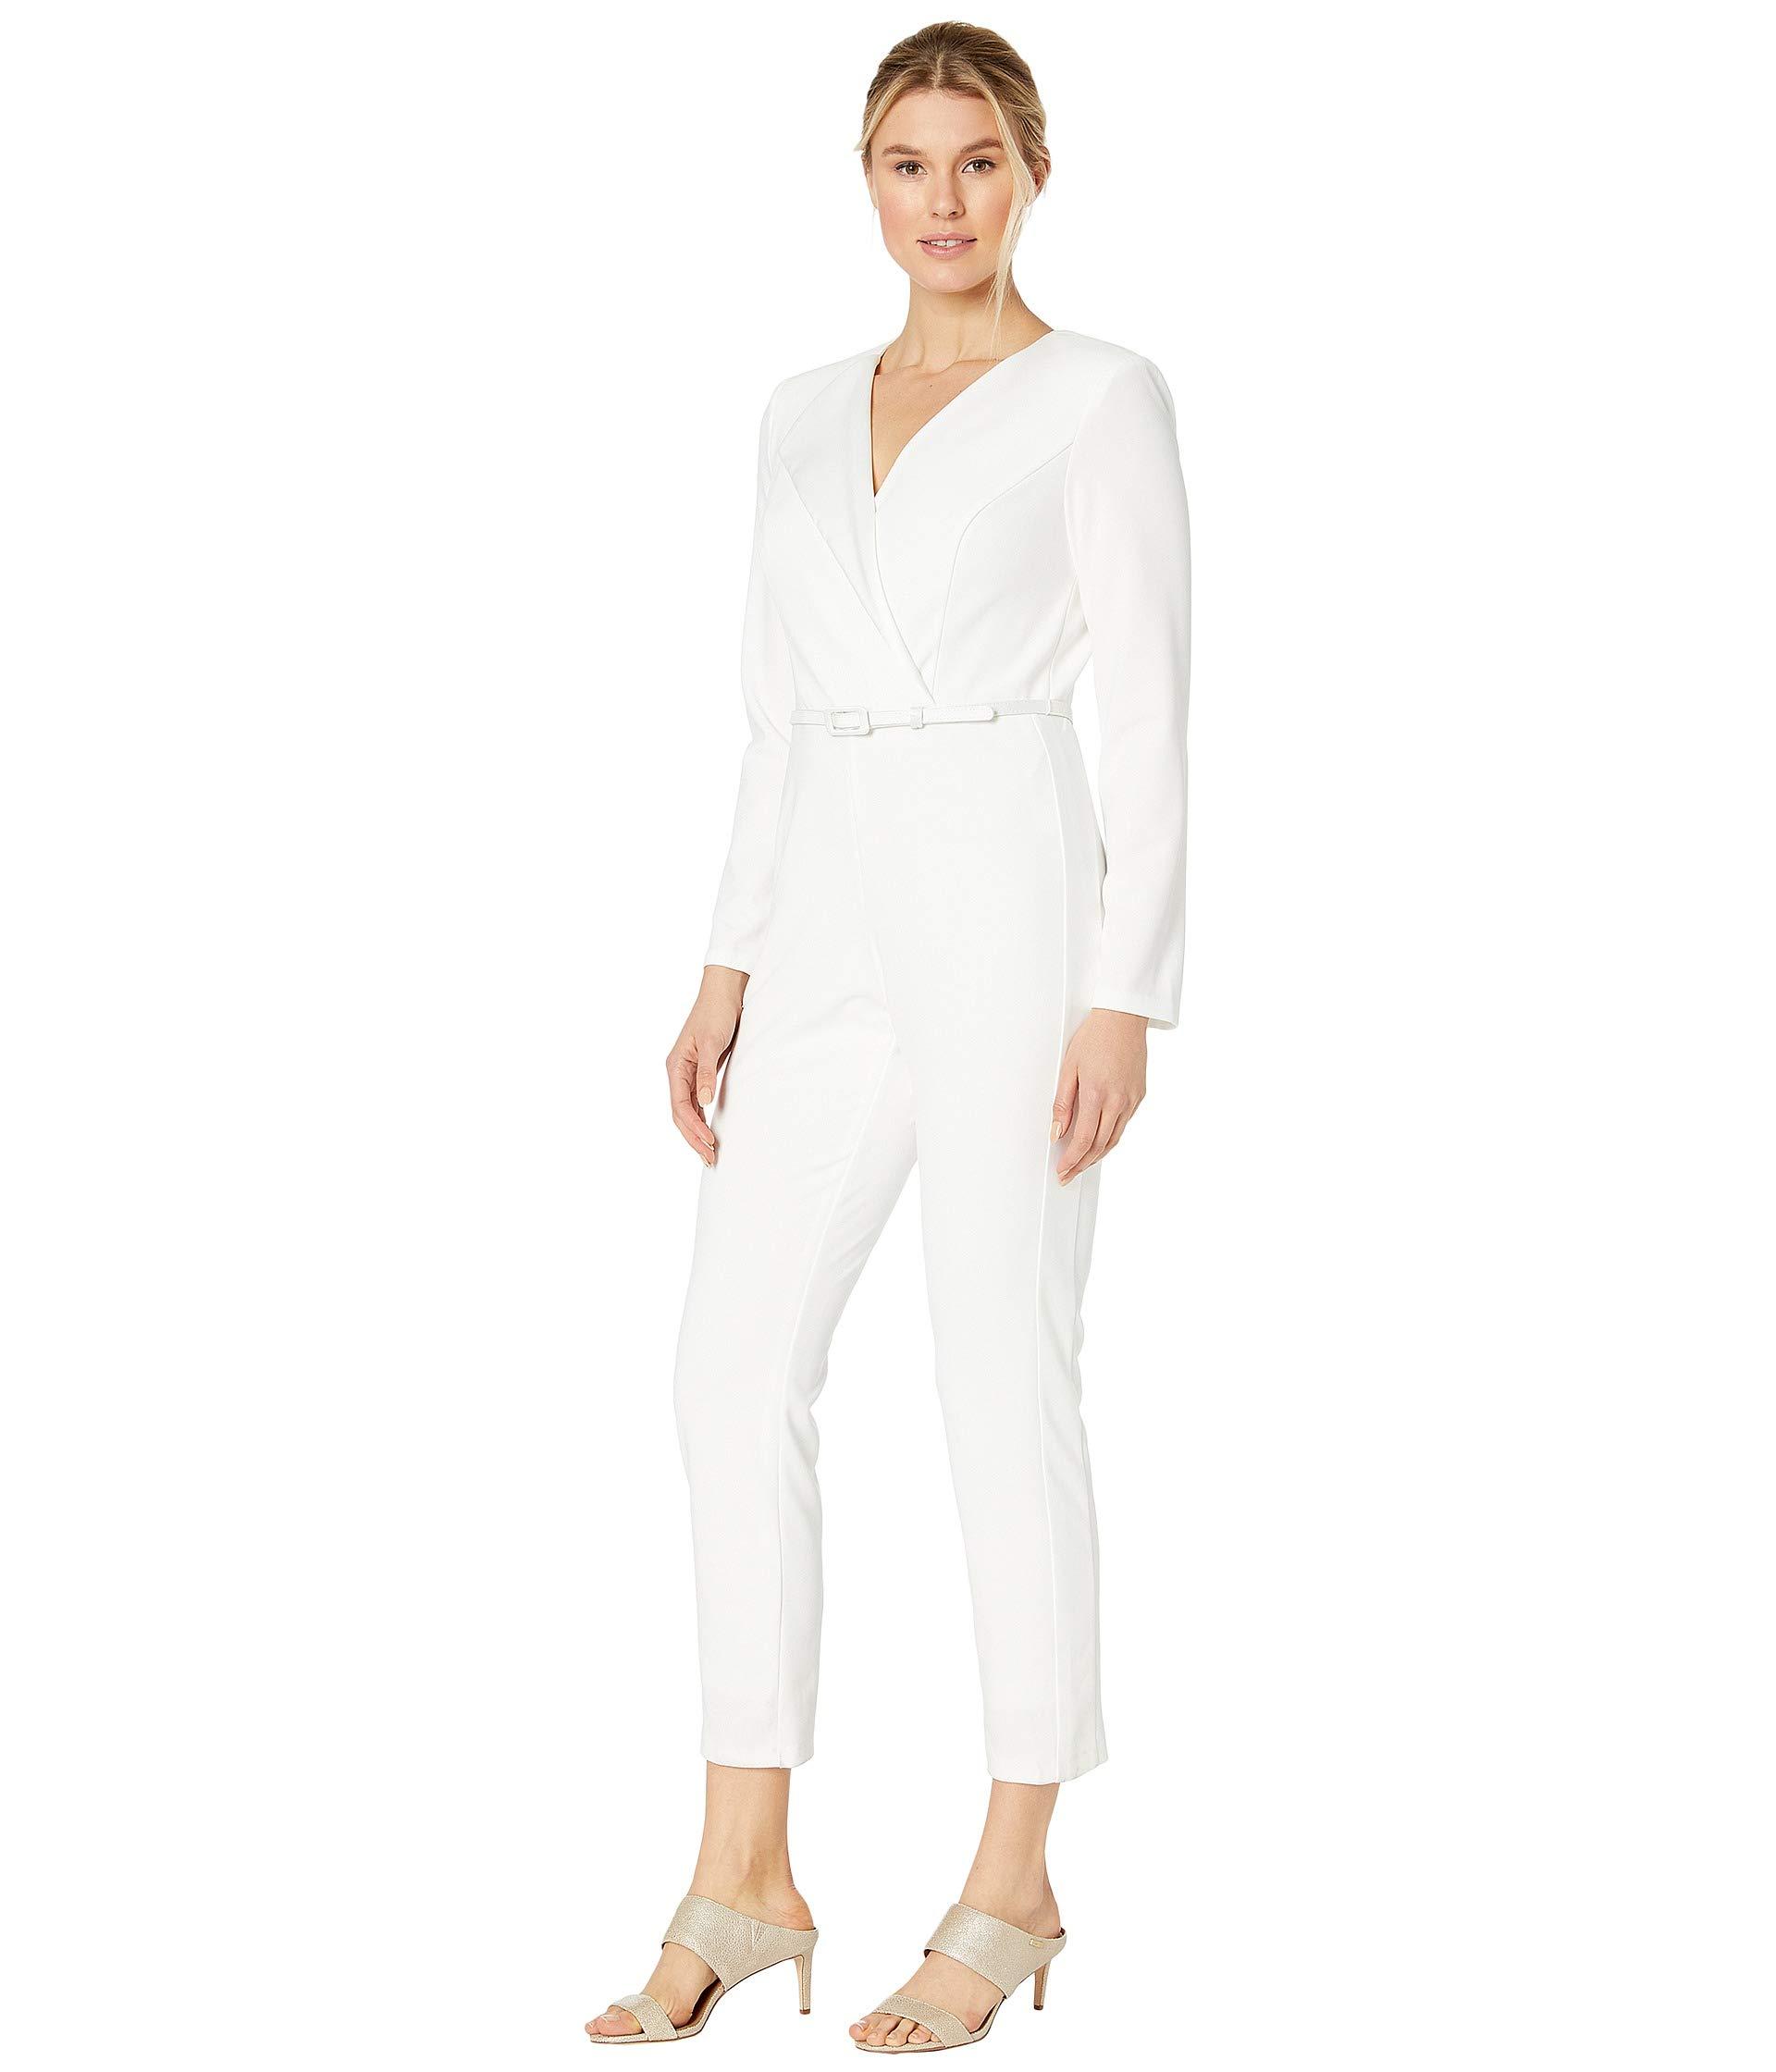 Adrianna Papell Tuxedo Jumpsuit With Satin in White - Lyst